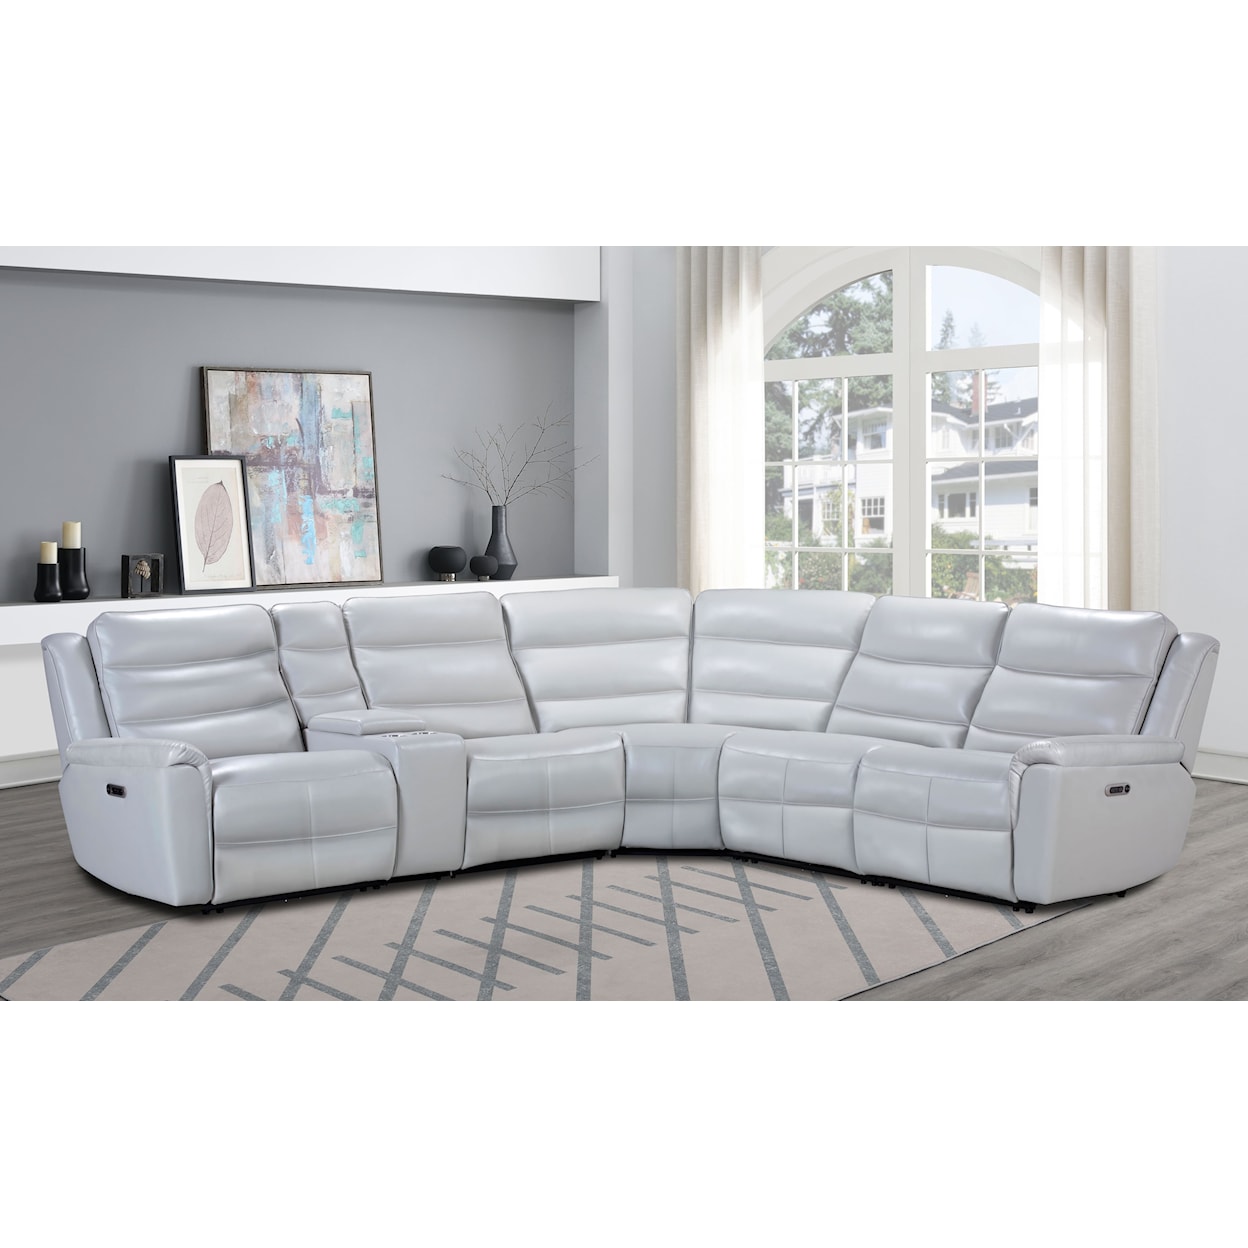 Lifestyle U8153S Leather Sectional U8153S Platinum Leather Sectional